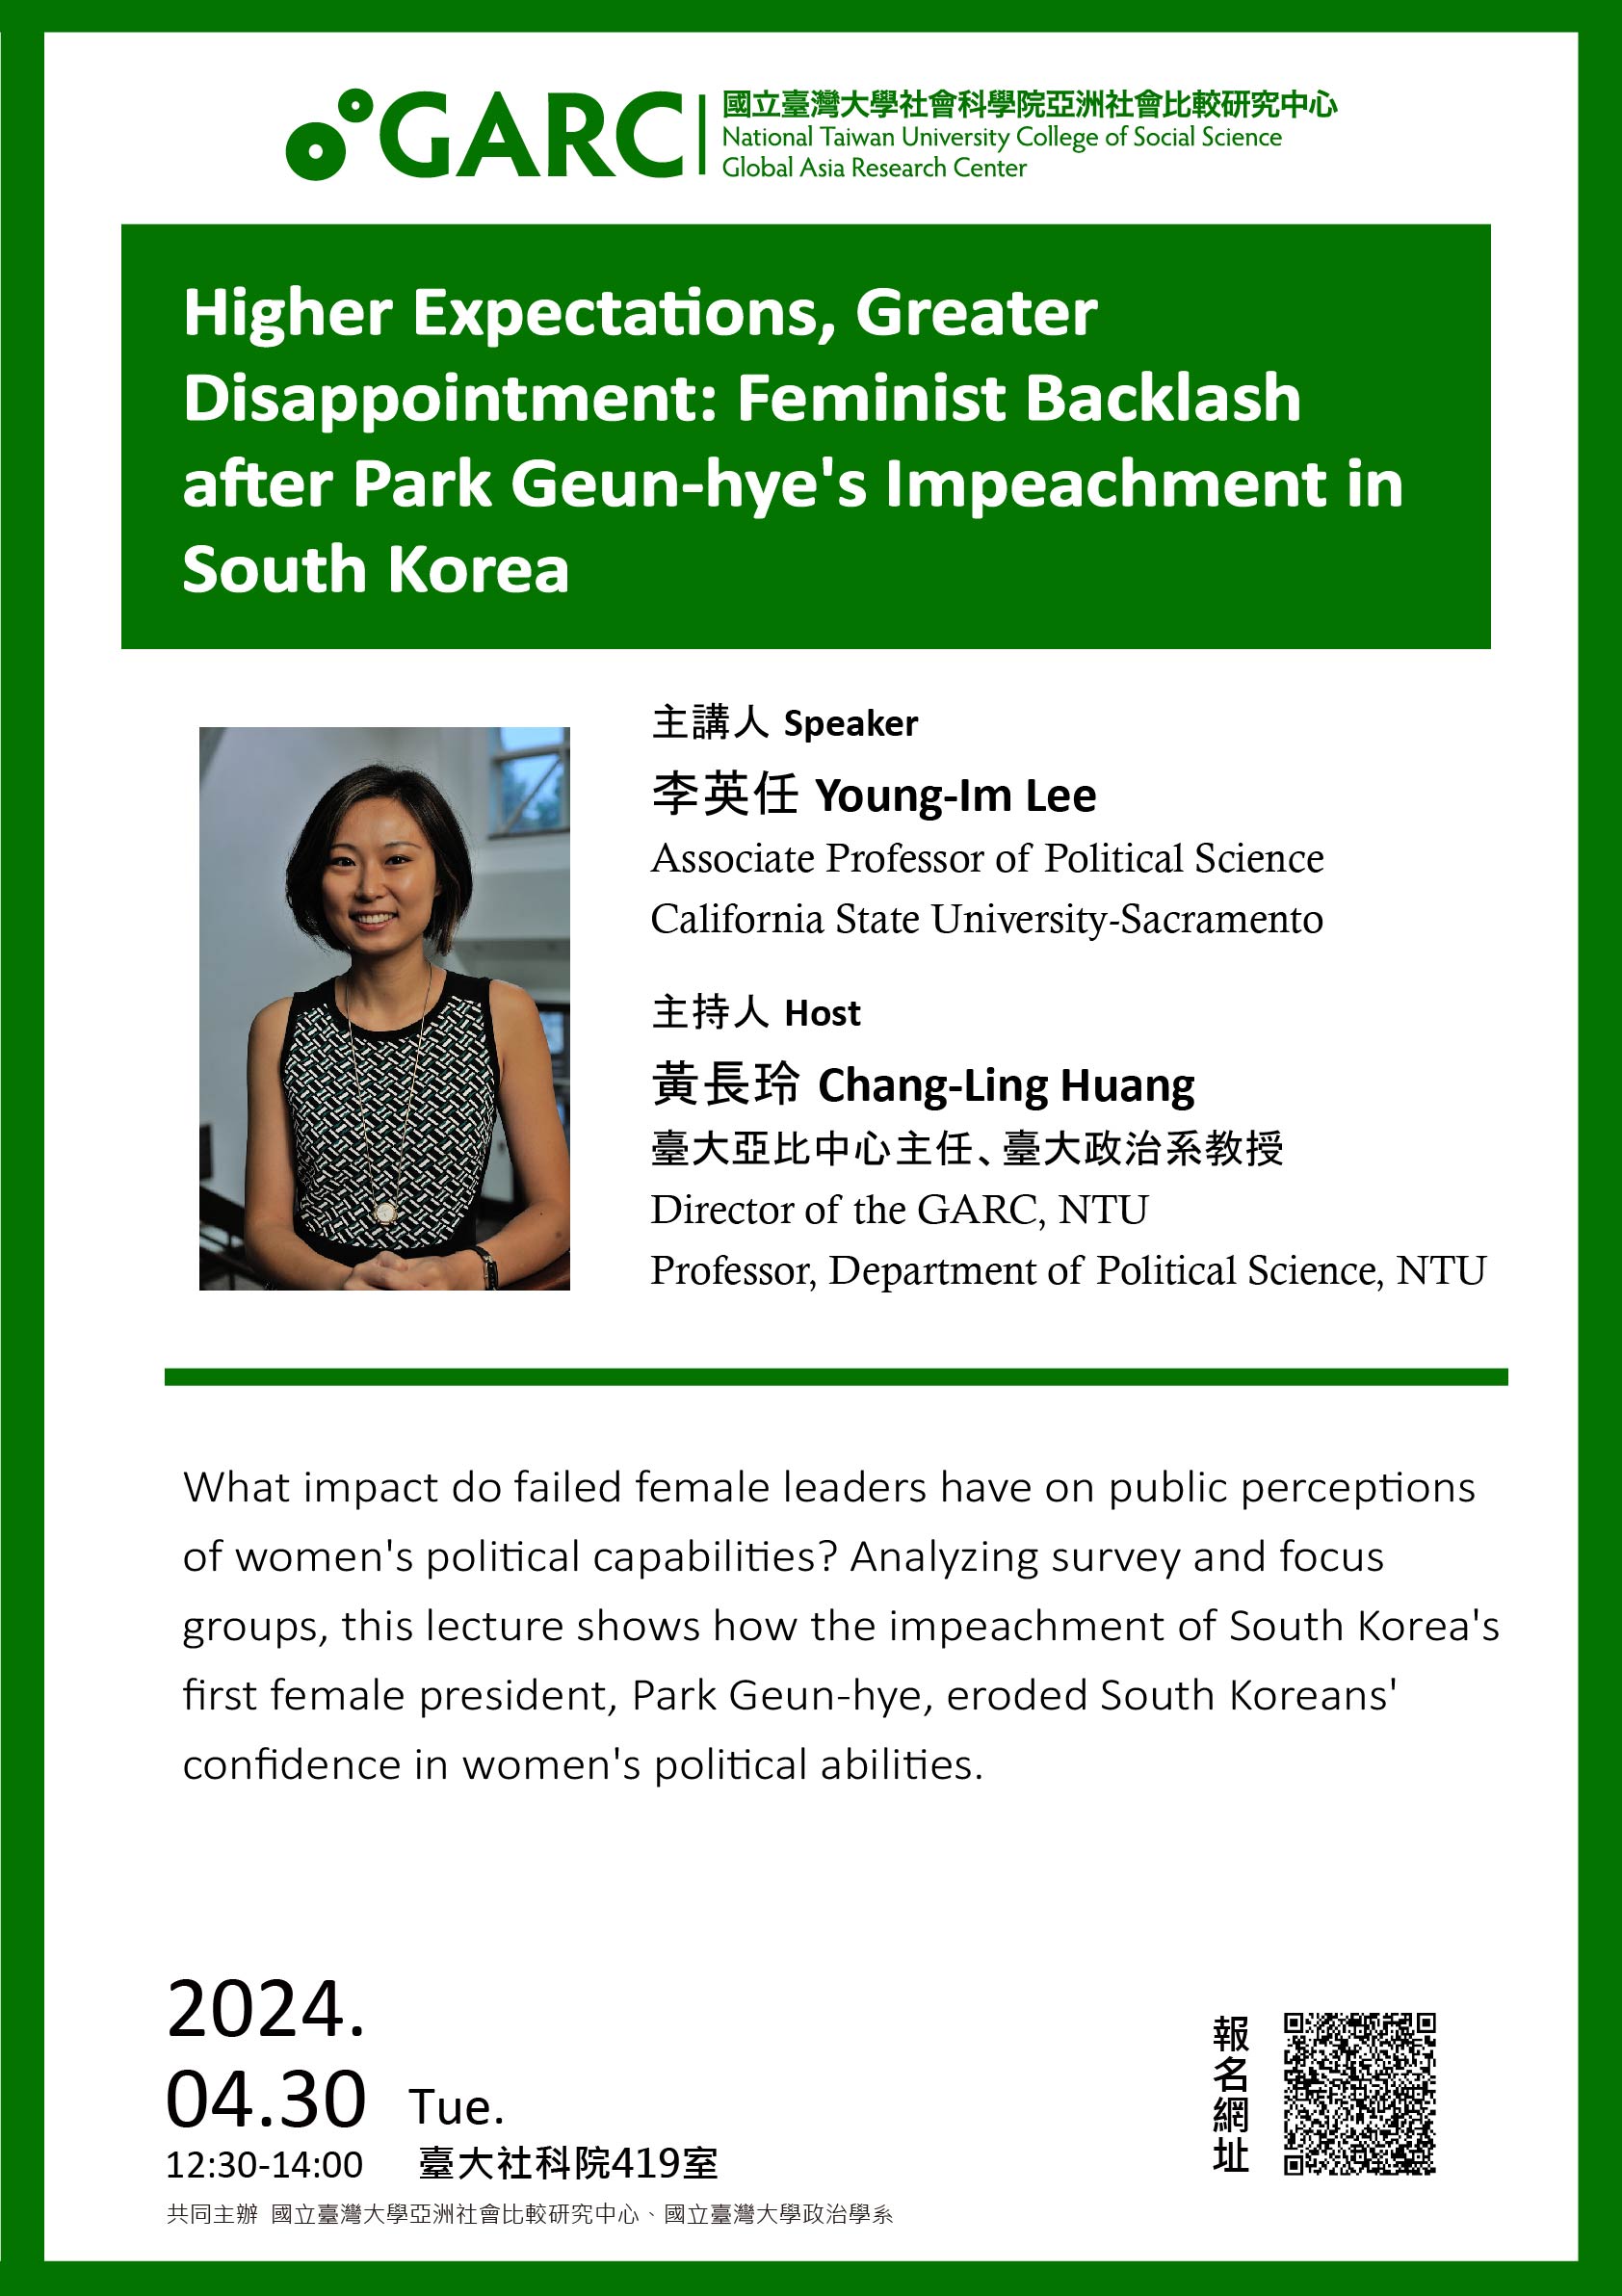 2024.04.30Higher Expectations, Greater Disappointment: Feminist Backlash after Park Geun-hye's Impeachment in South Korea